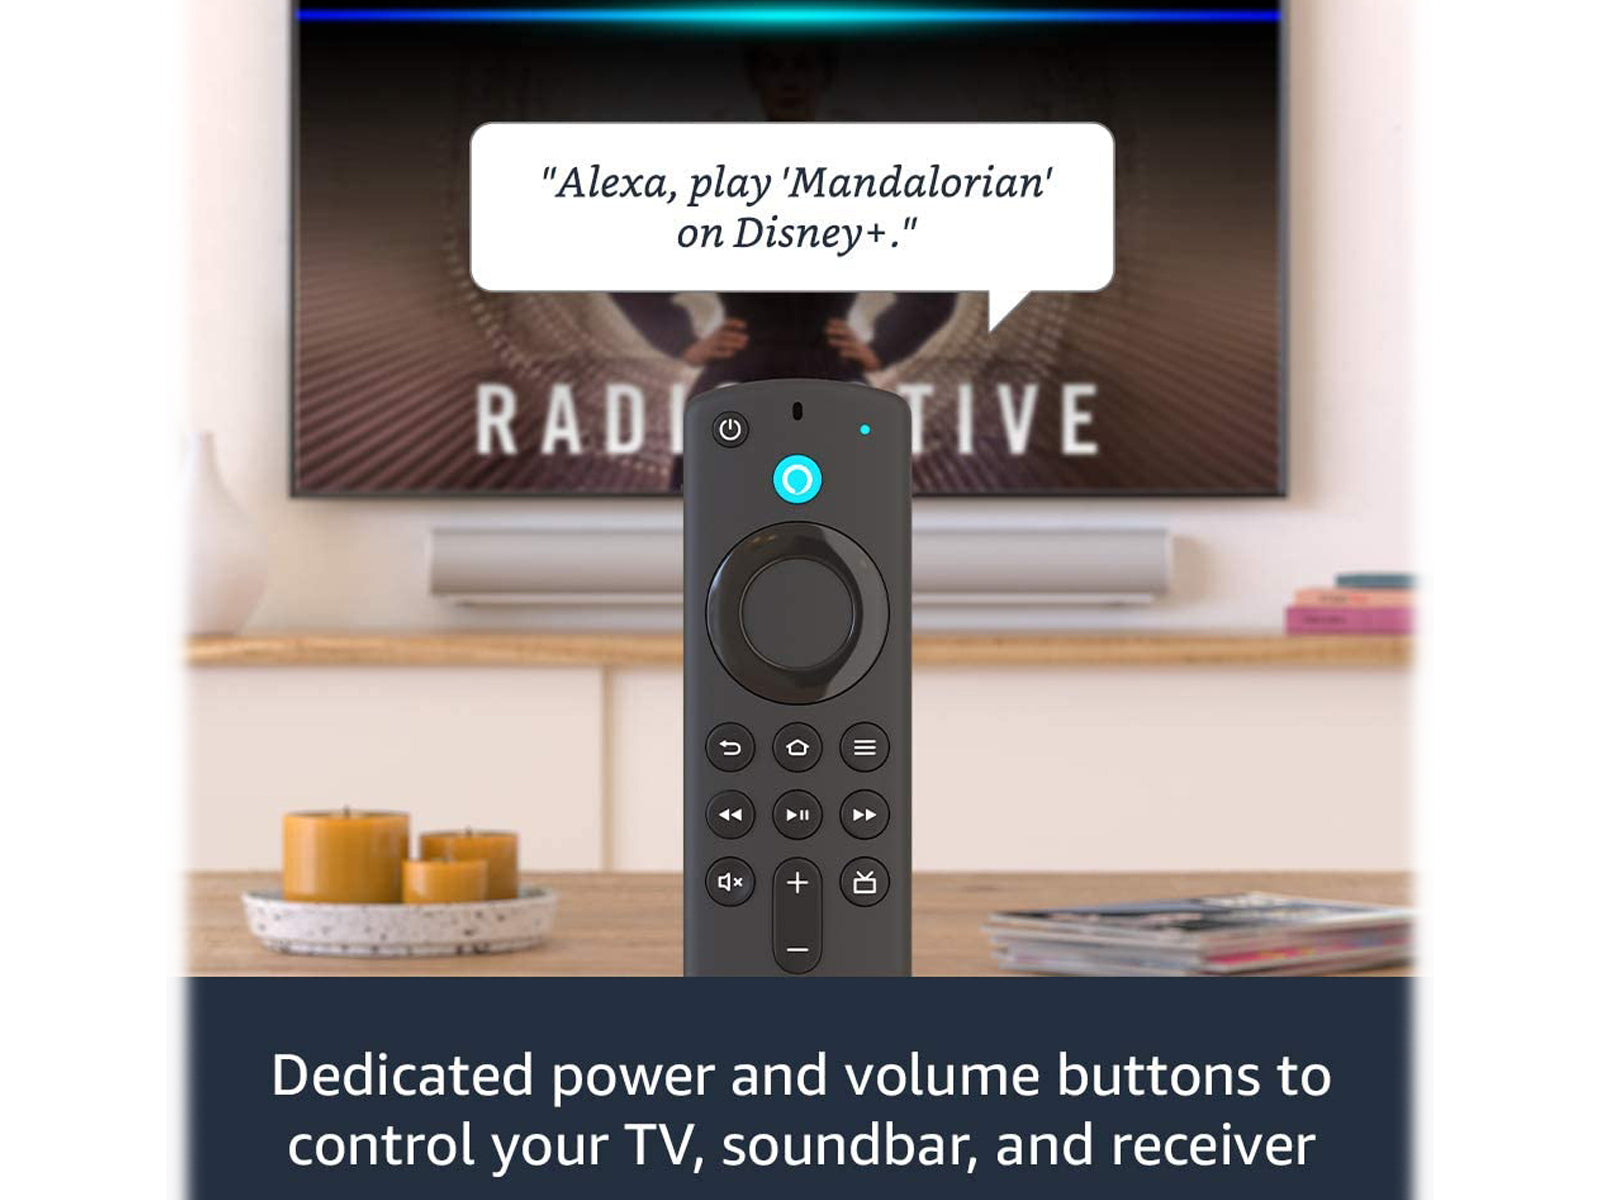 Image shows the Amazon Fire TV Stick HD 2020 remote with information